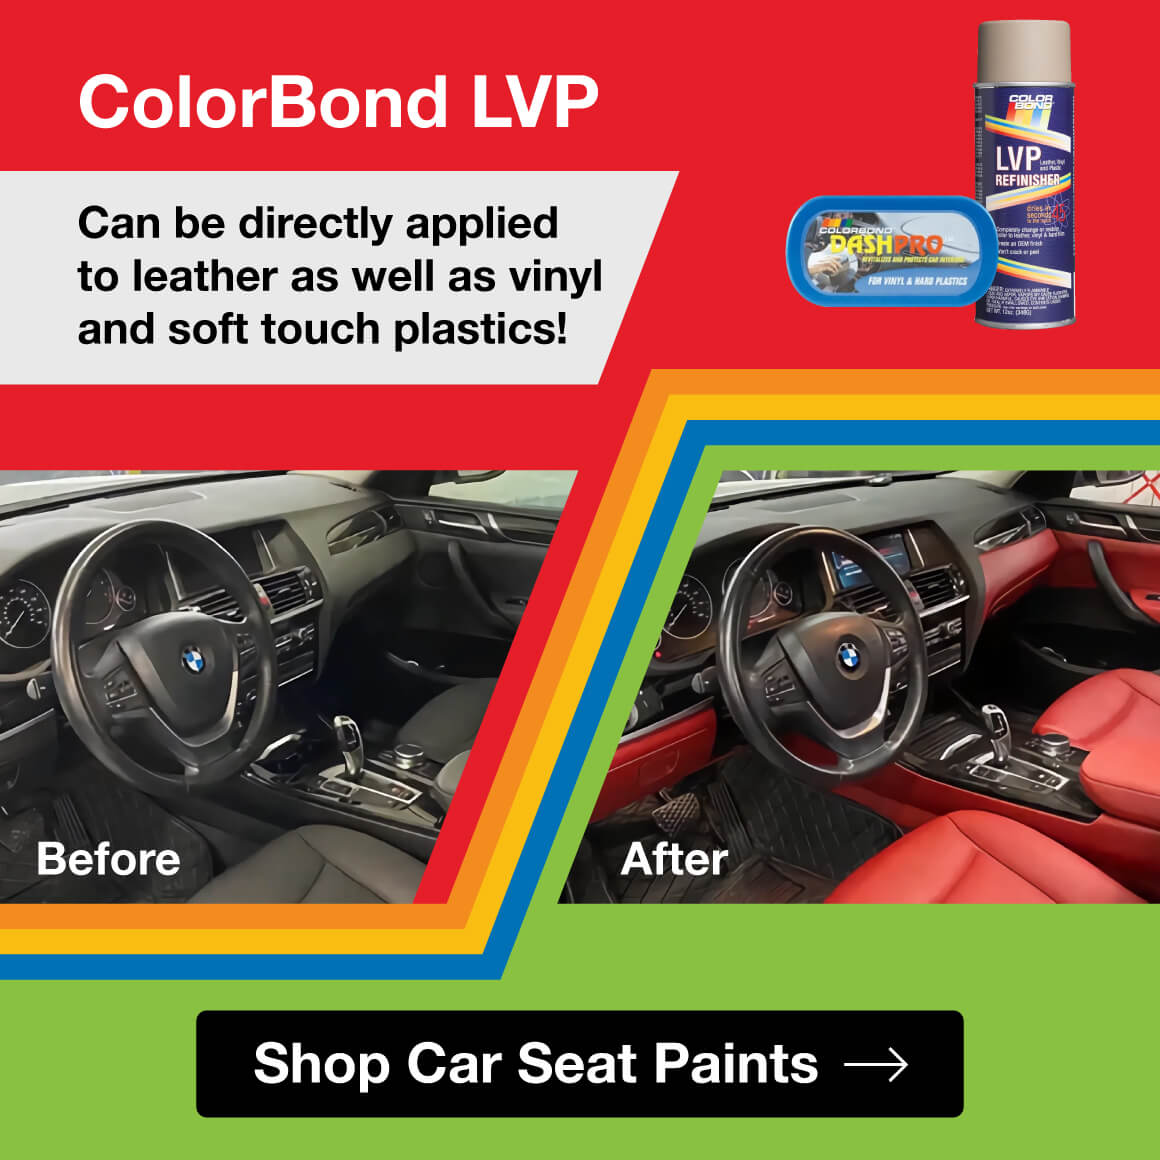 BMW Restyle with Colorbond's LVP Refinisher